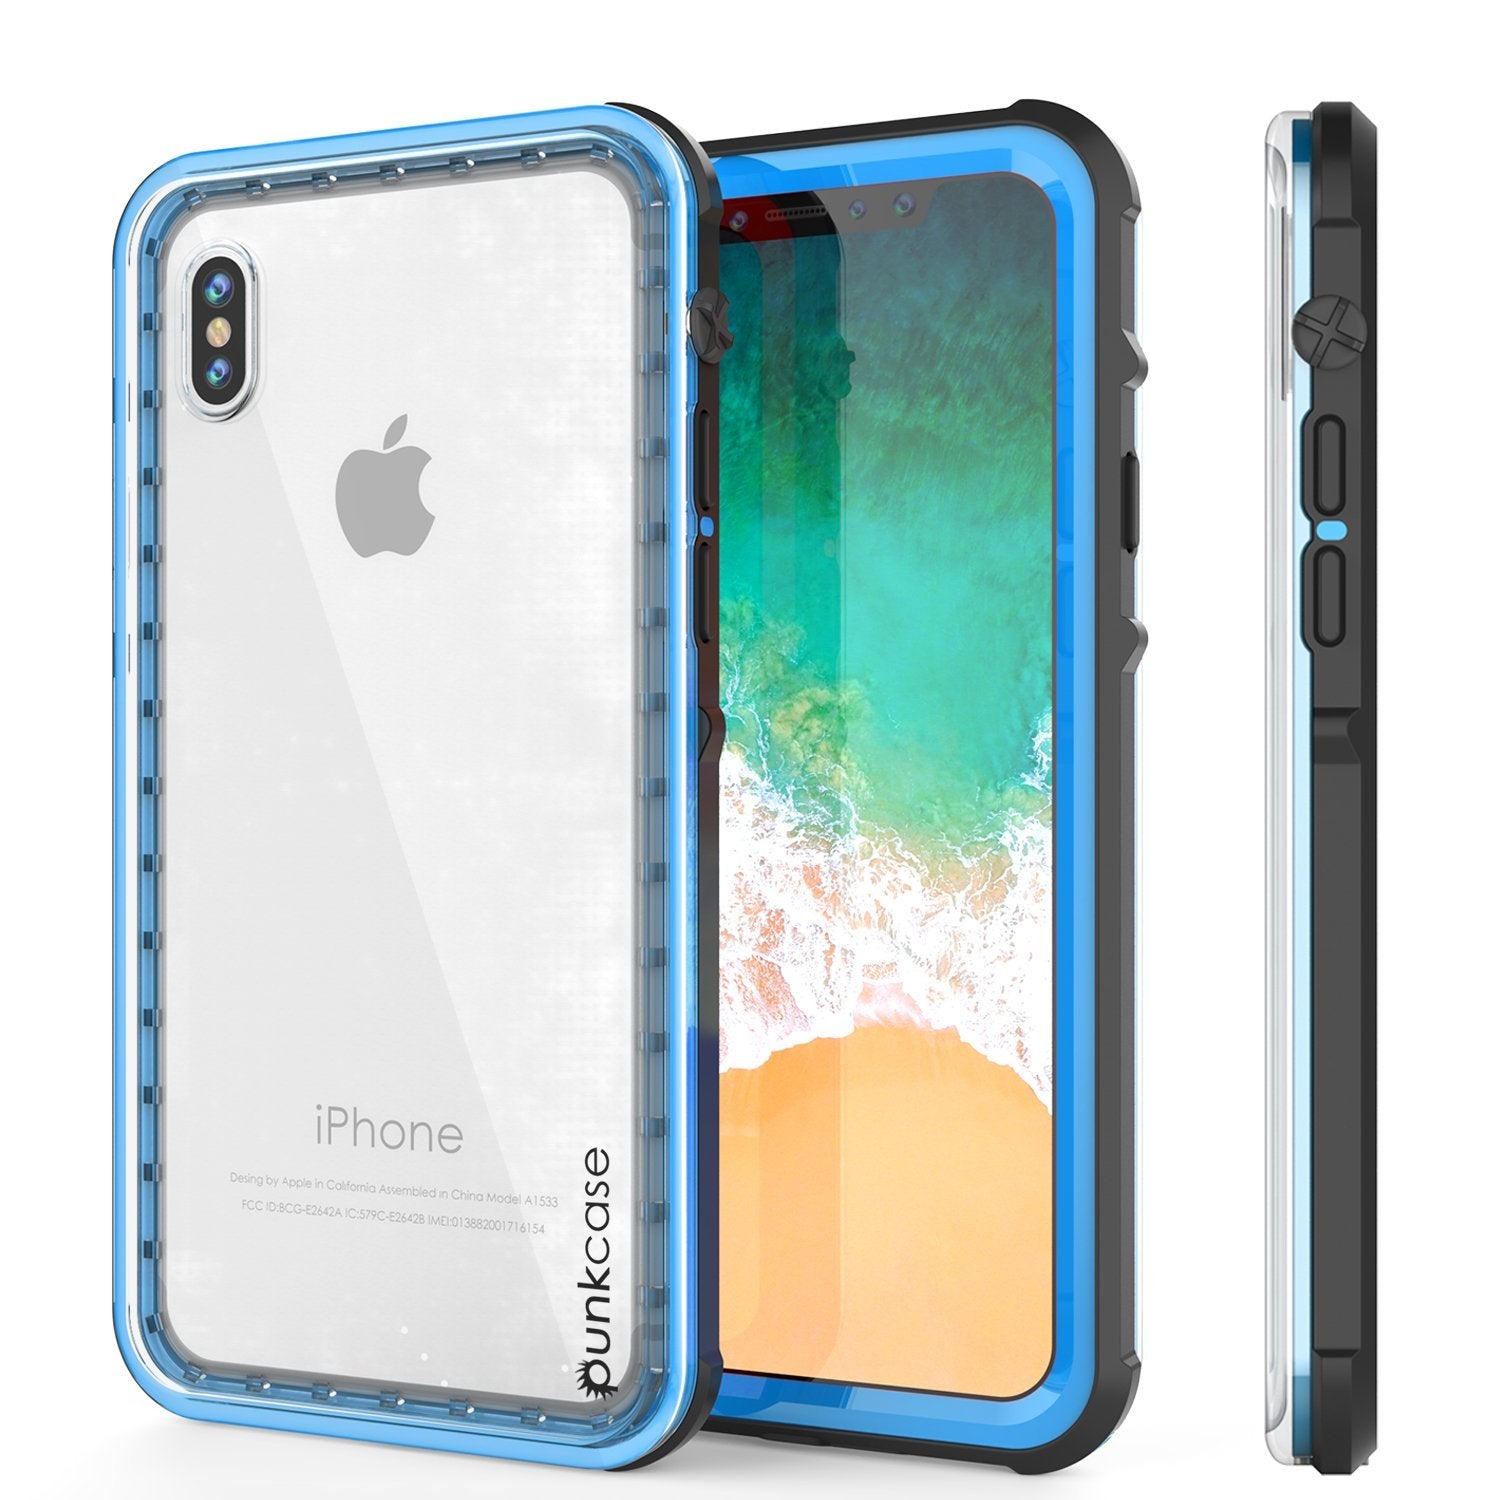 iPhone XS Max Case, PUNKCase [CRYSTAL SERIES] Protective IP68 Certified Cover [Light Blue]